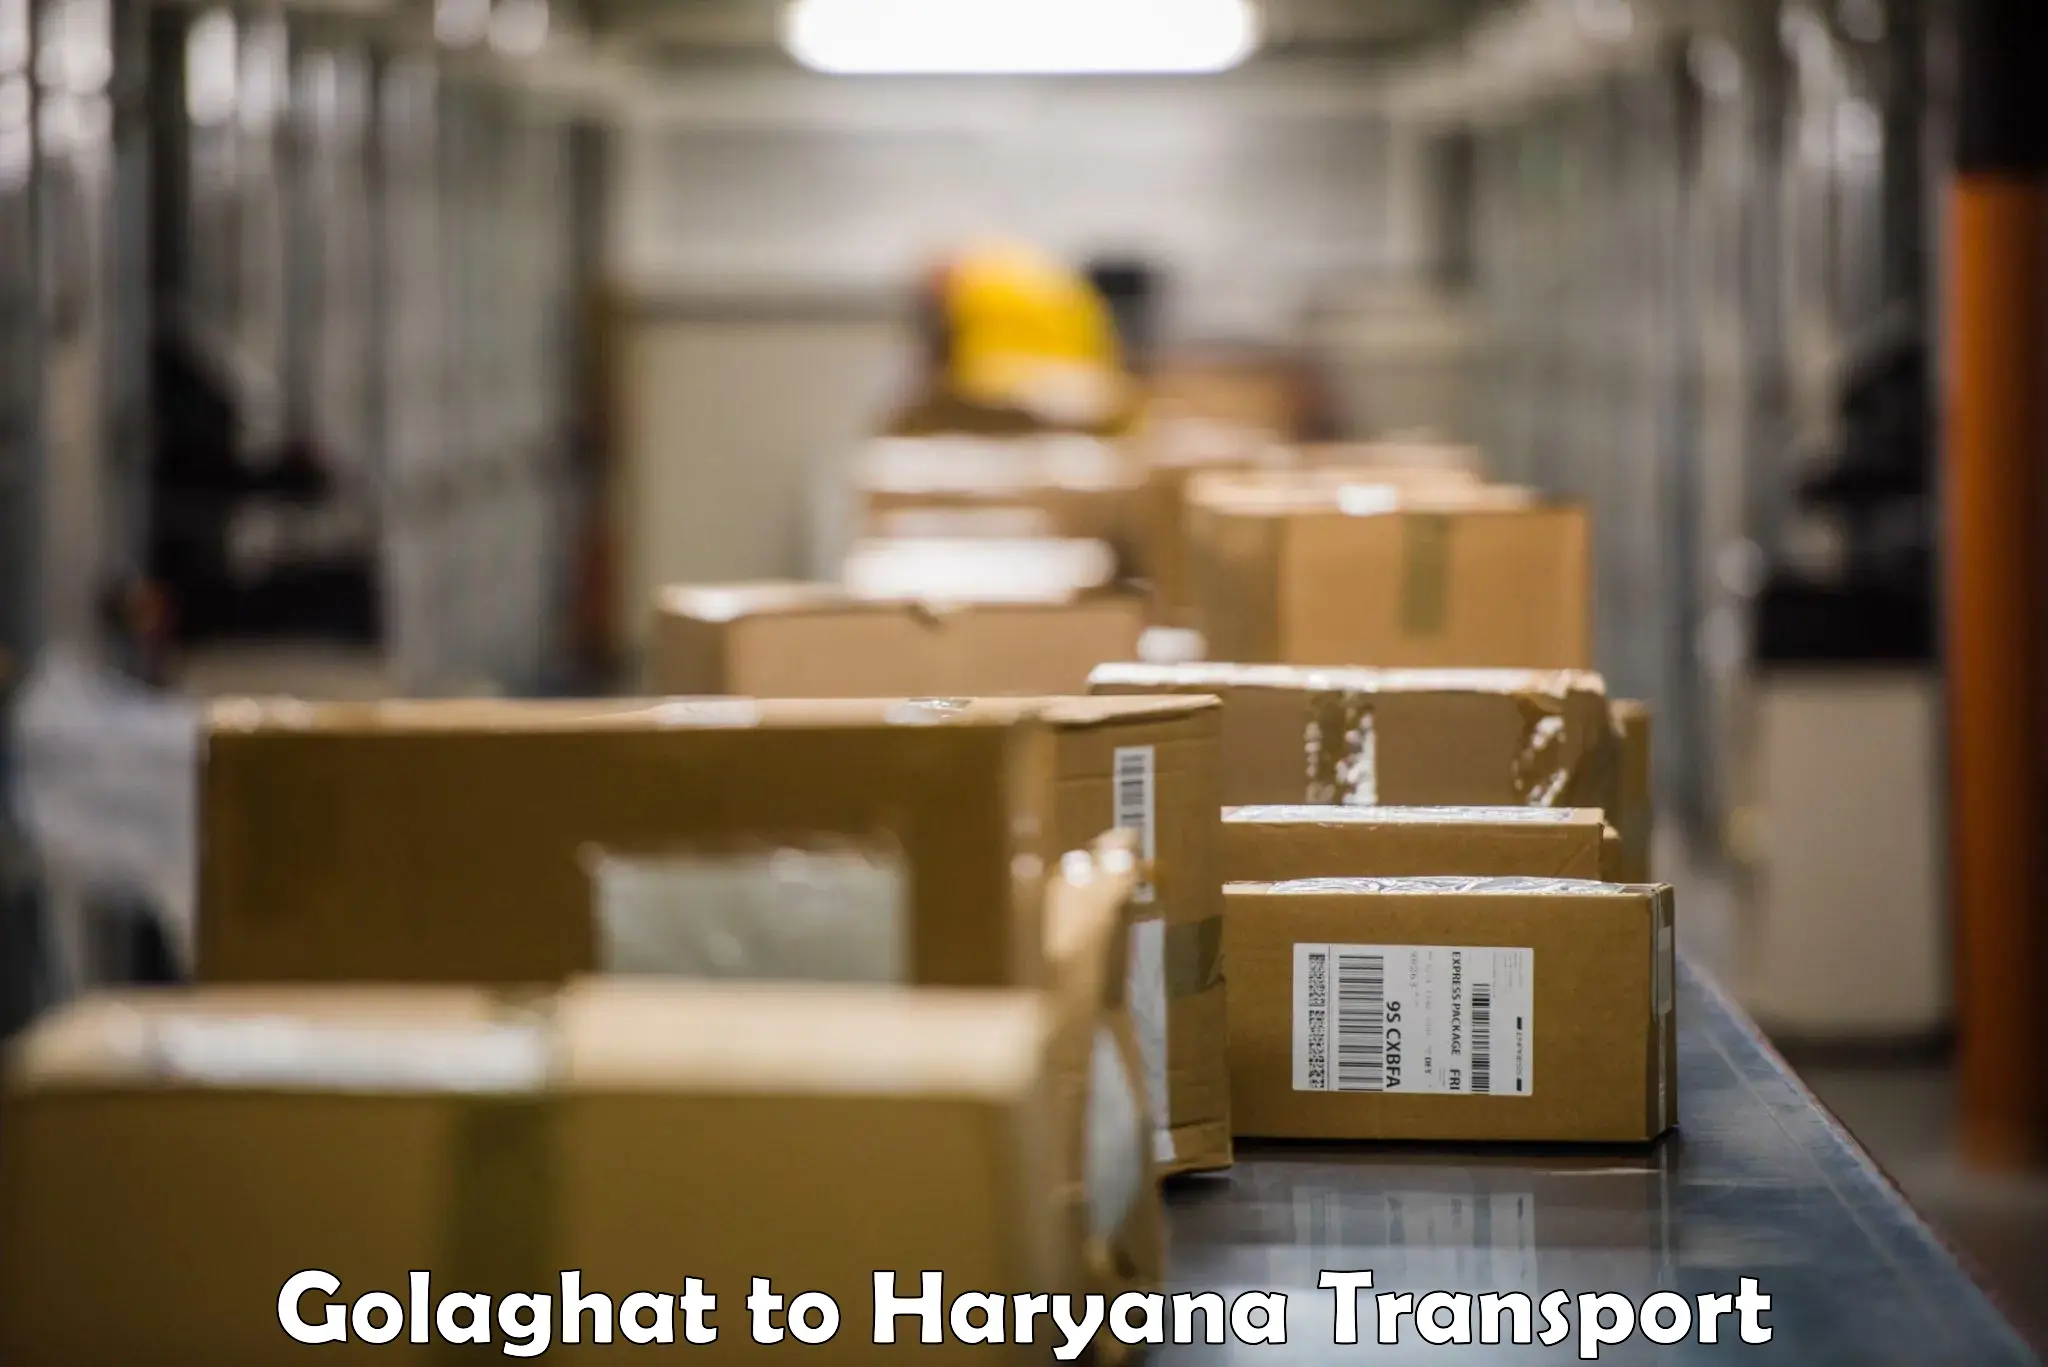 Furniture transport service Golaghat to Mahendragarh